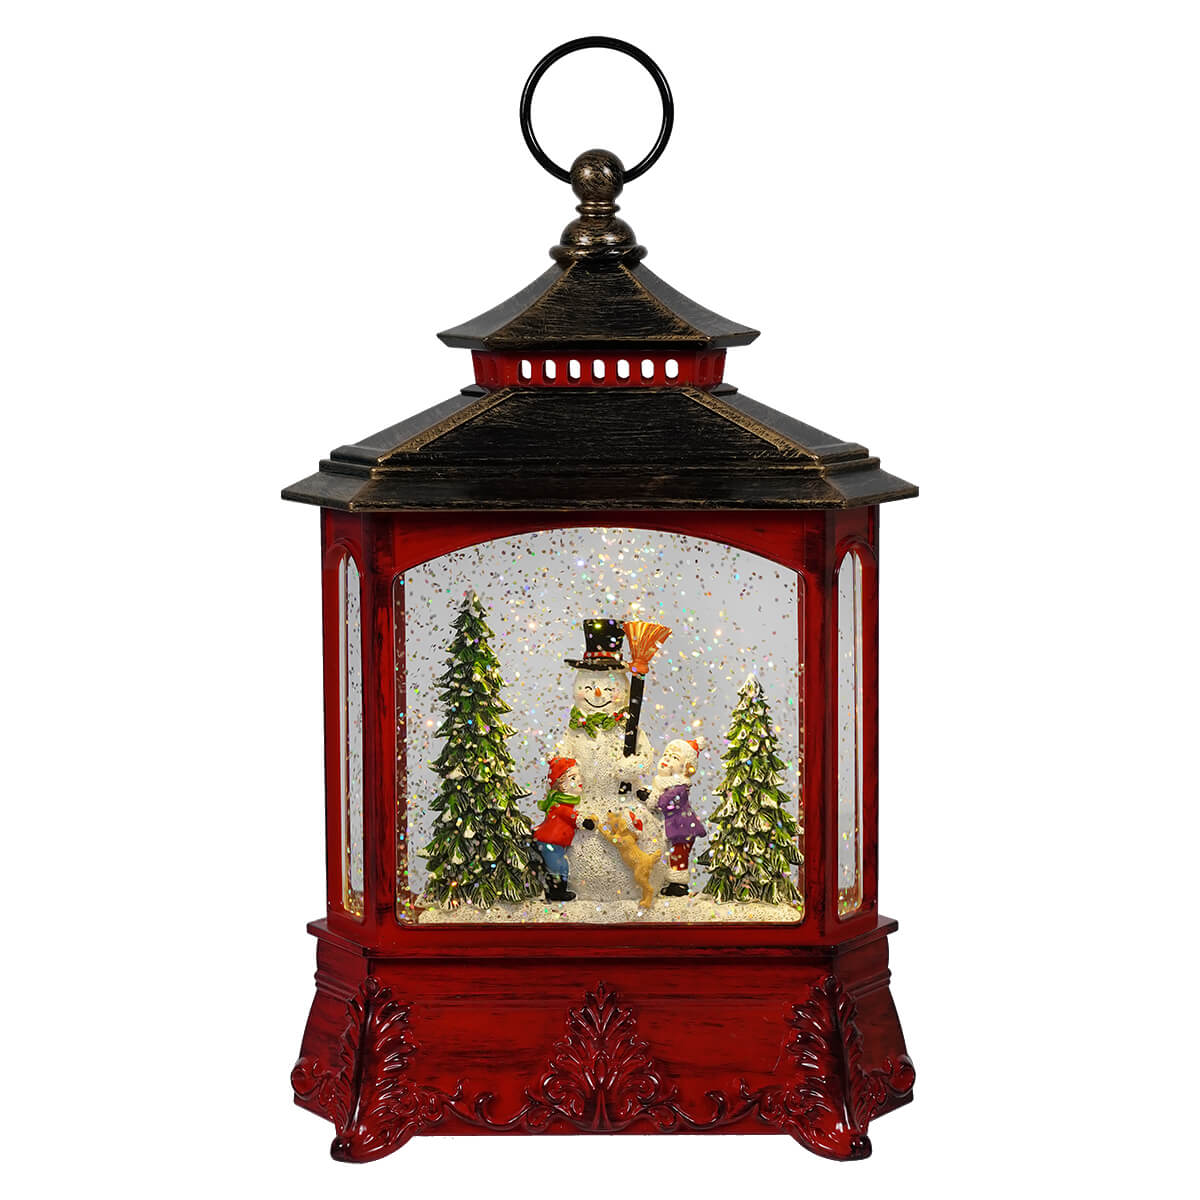 Lighted Red Holiday Snowman Scene Spinning Water Globe Lantern